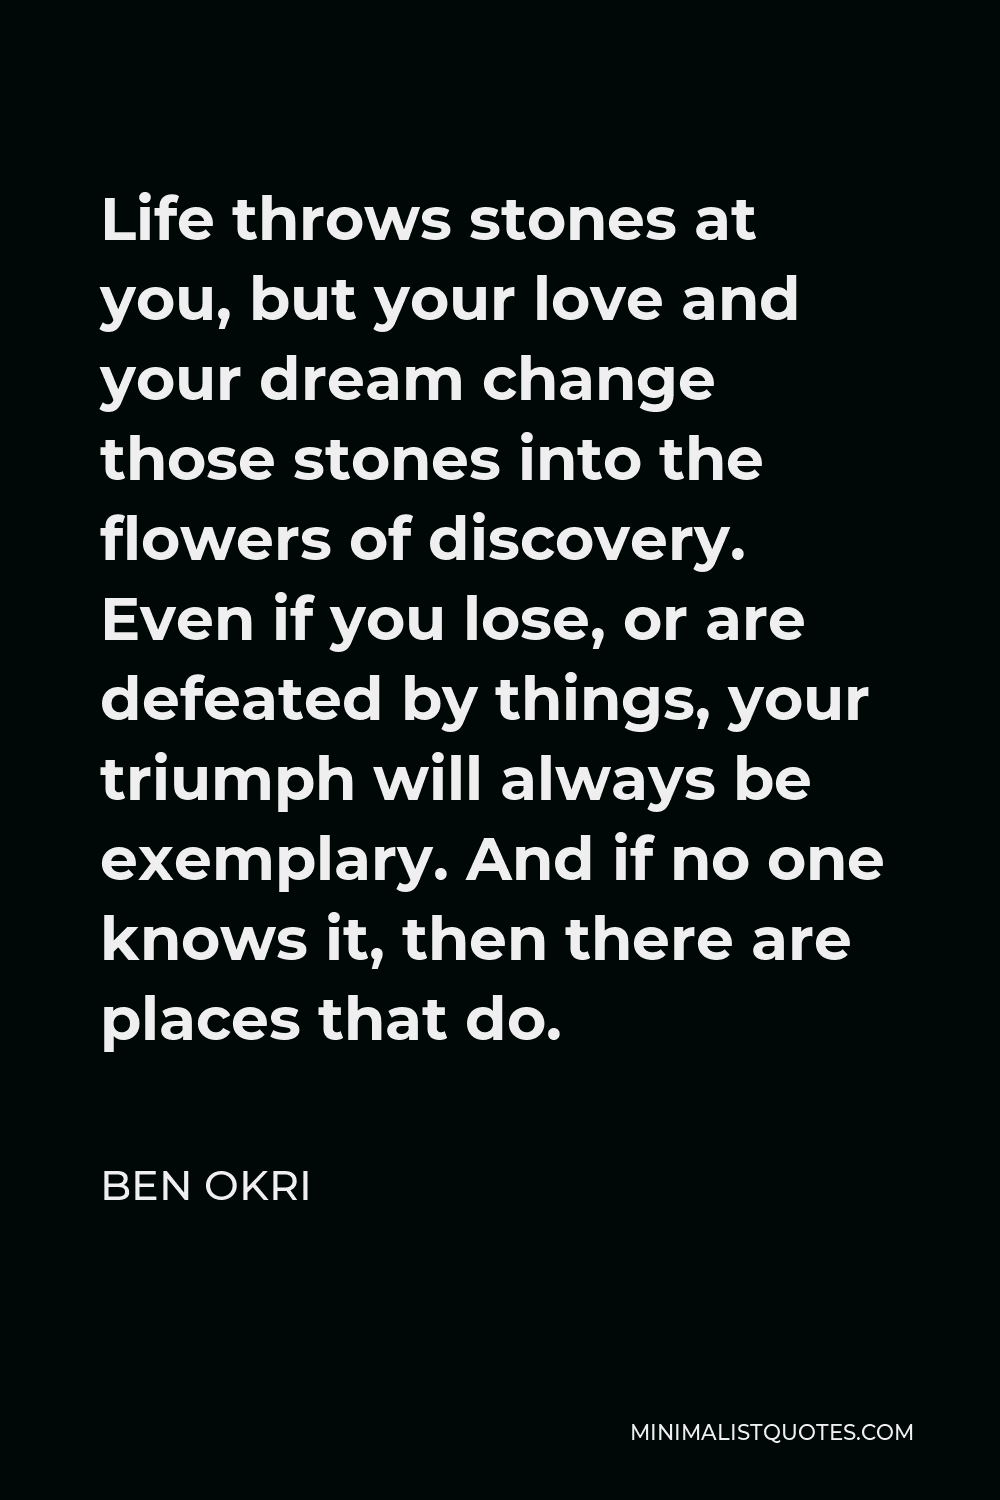 Ben Okri Quote - Life throws stones at you, but your love and your dream change those stones into the flowers of discovery. Even if you lose, or are defeated by things, your triumph will always be exemplary. And if no one knows it, then there are places that do.